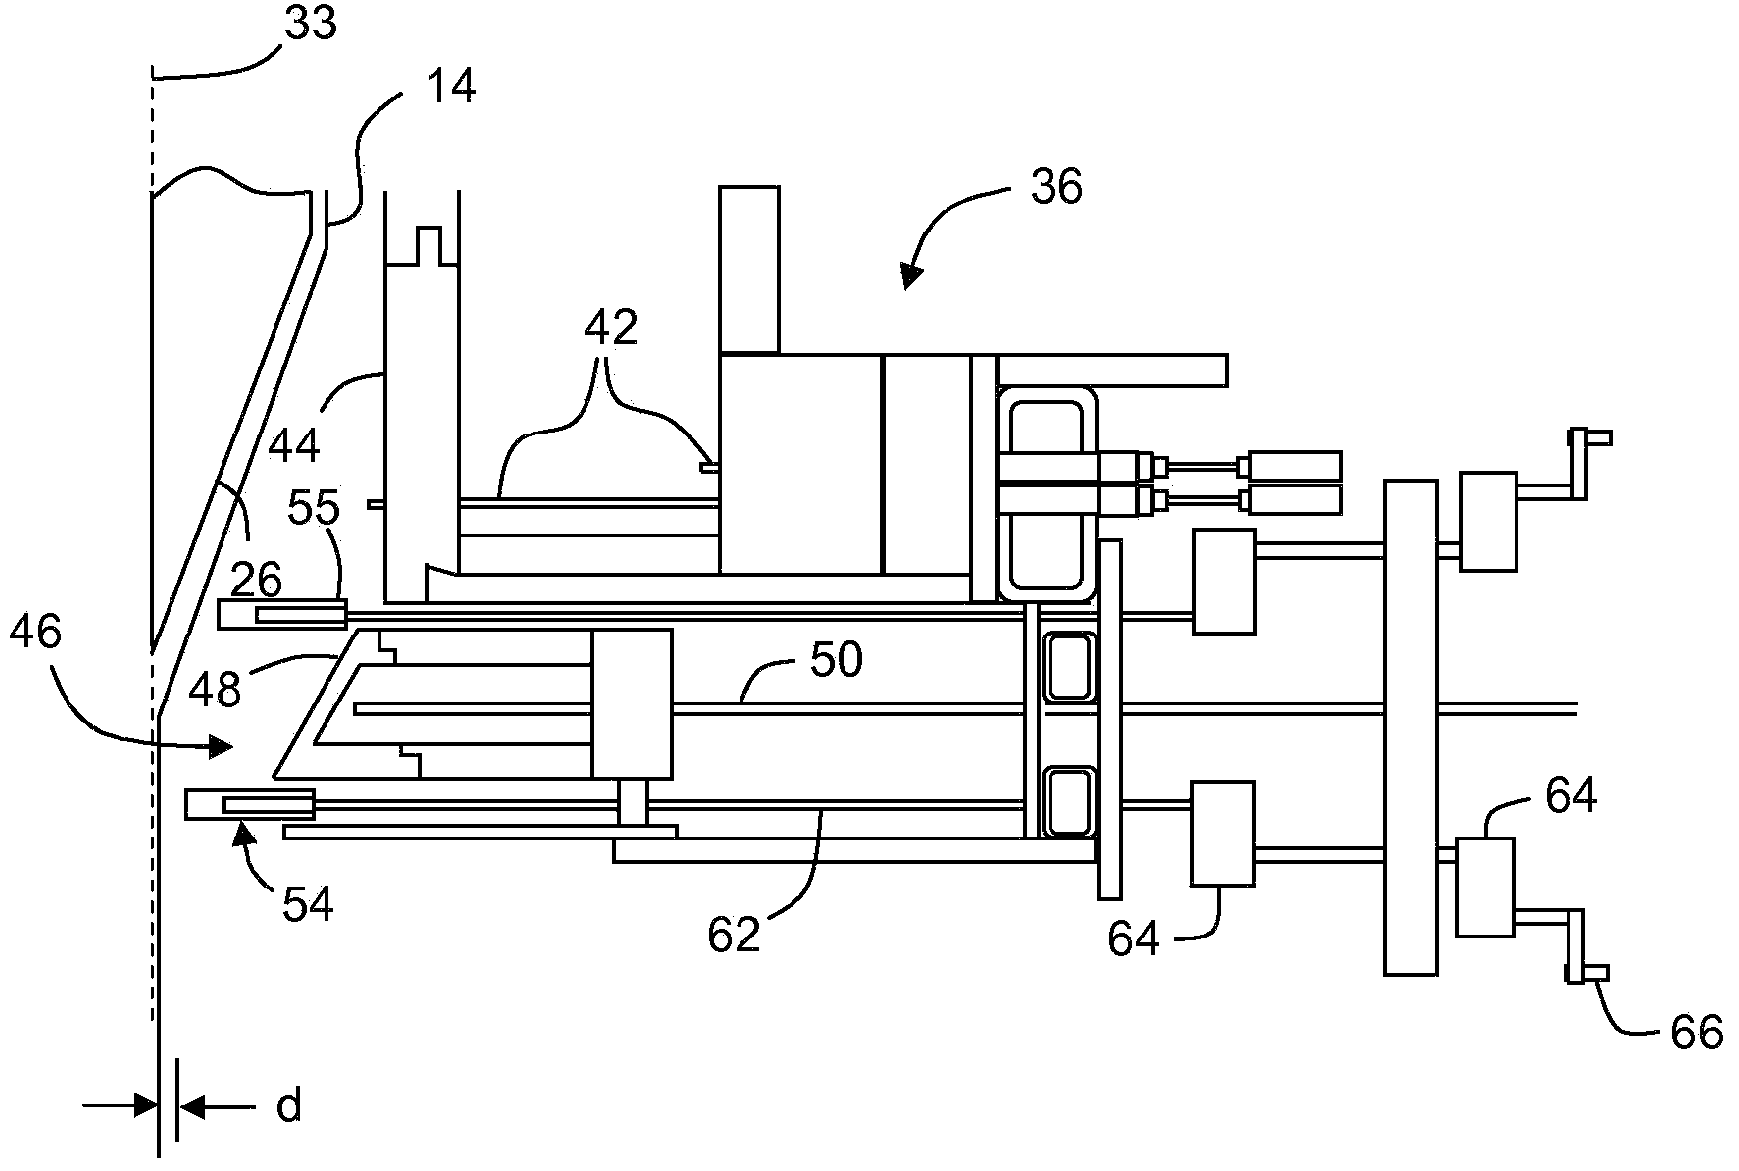 Apparatus for reducing radiative heat loss from a forming body in a glass forming process